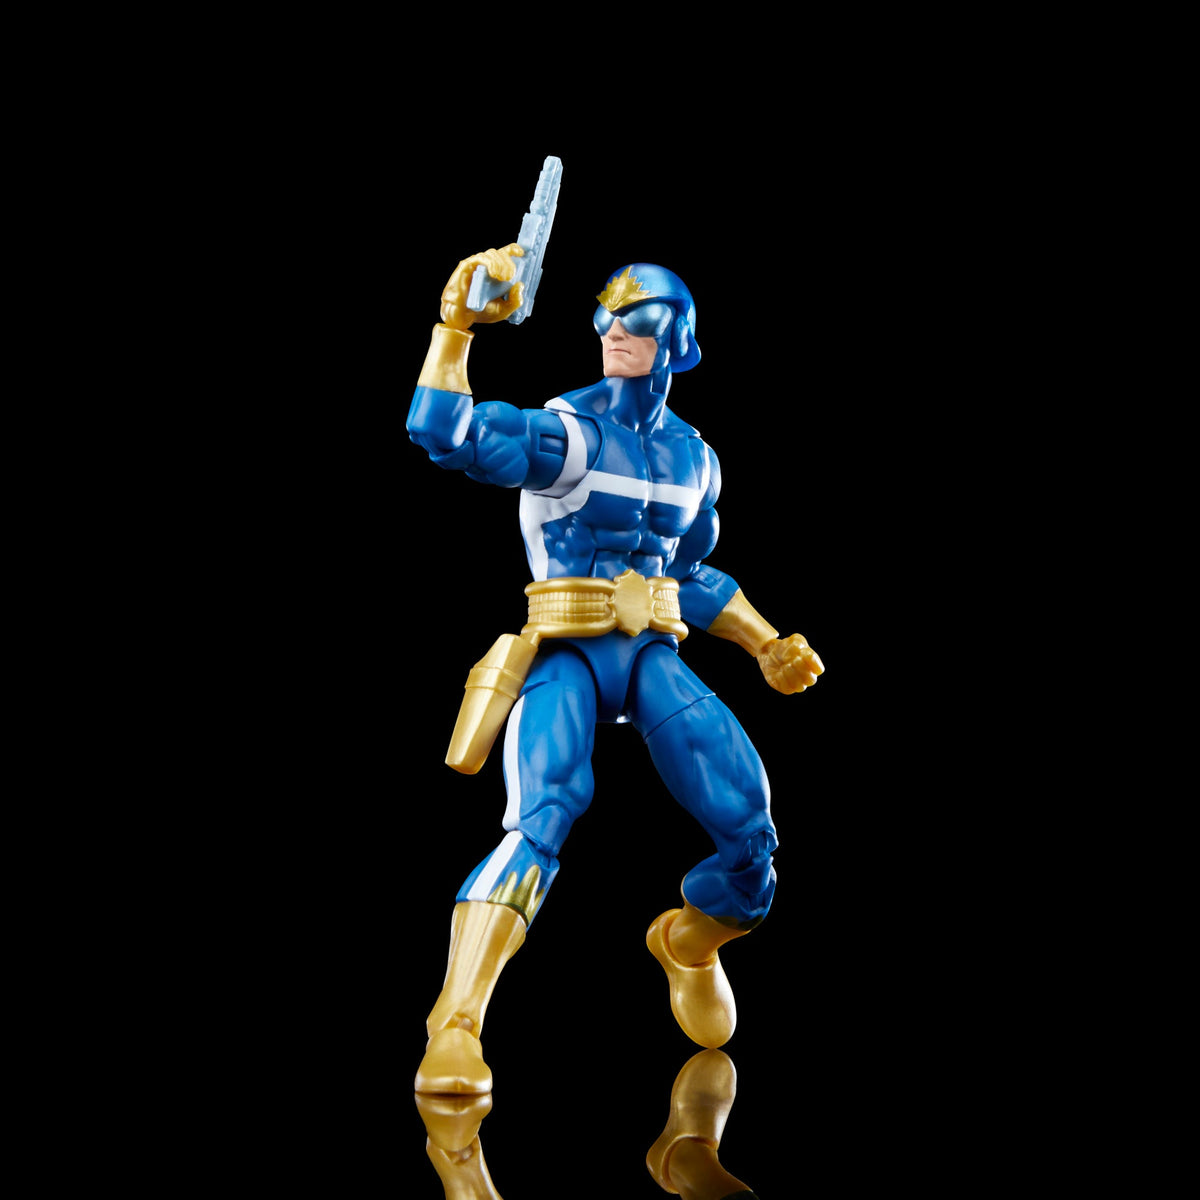 Marvel Legends Series Star-Lord Guardians of the Galaxy Figure